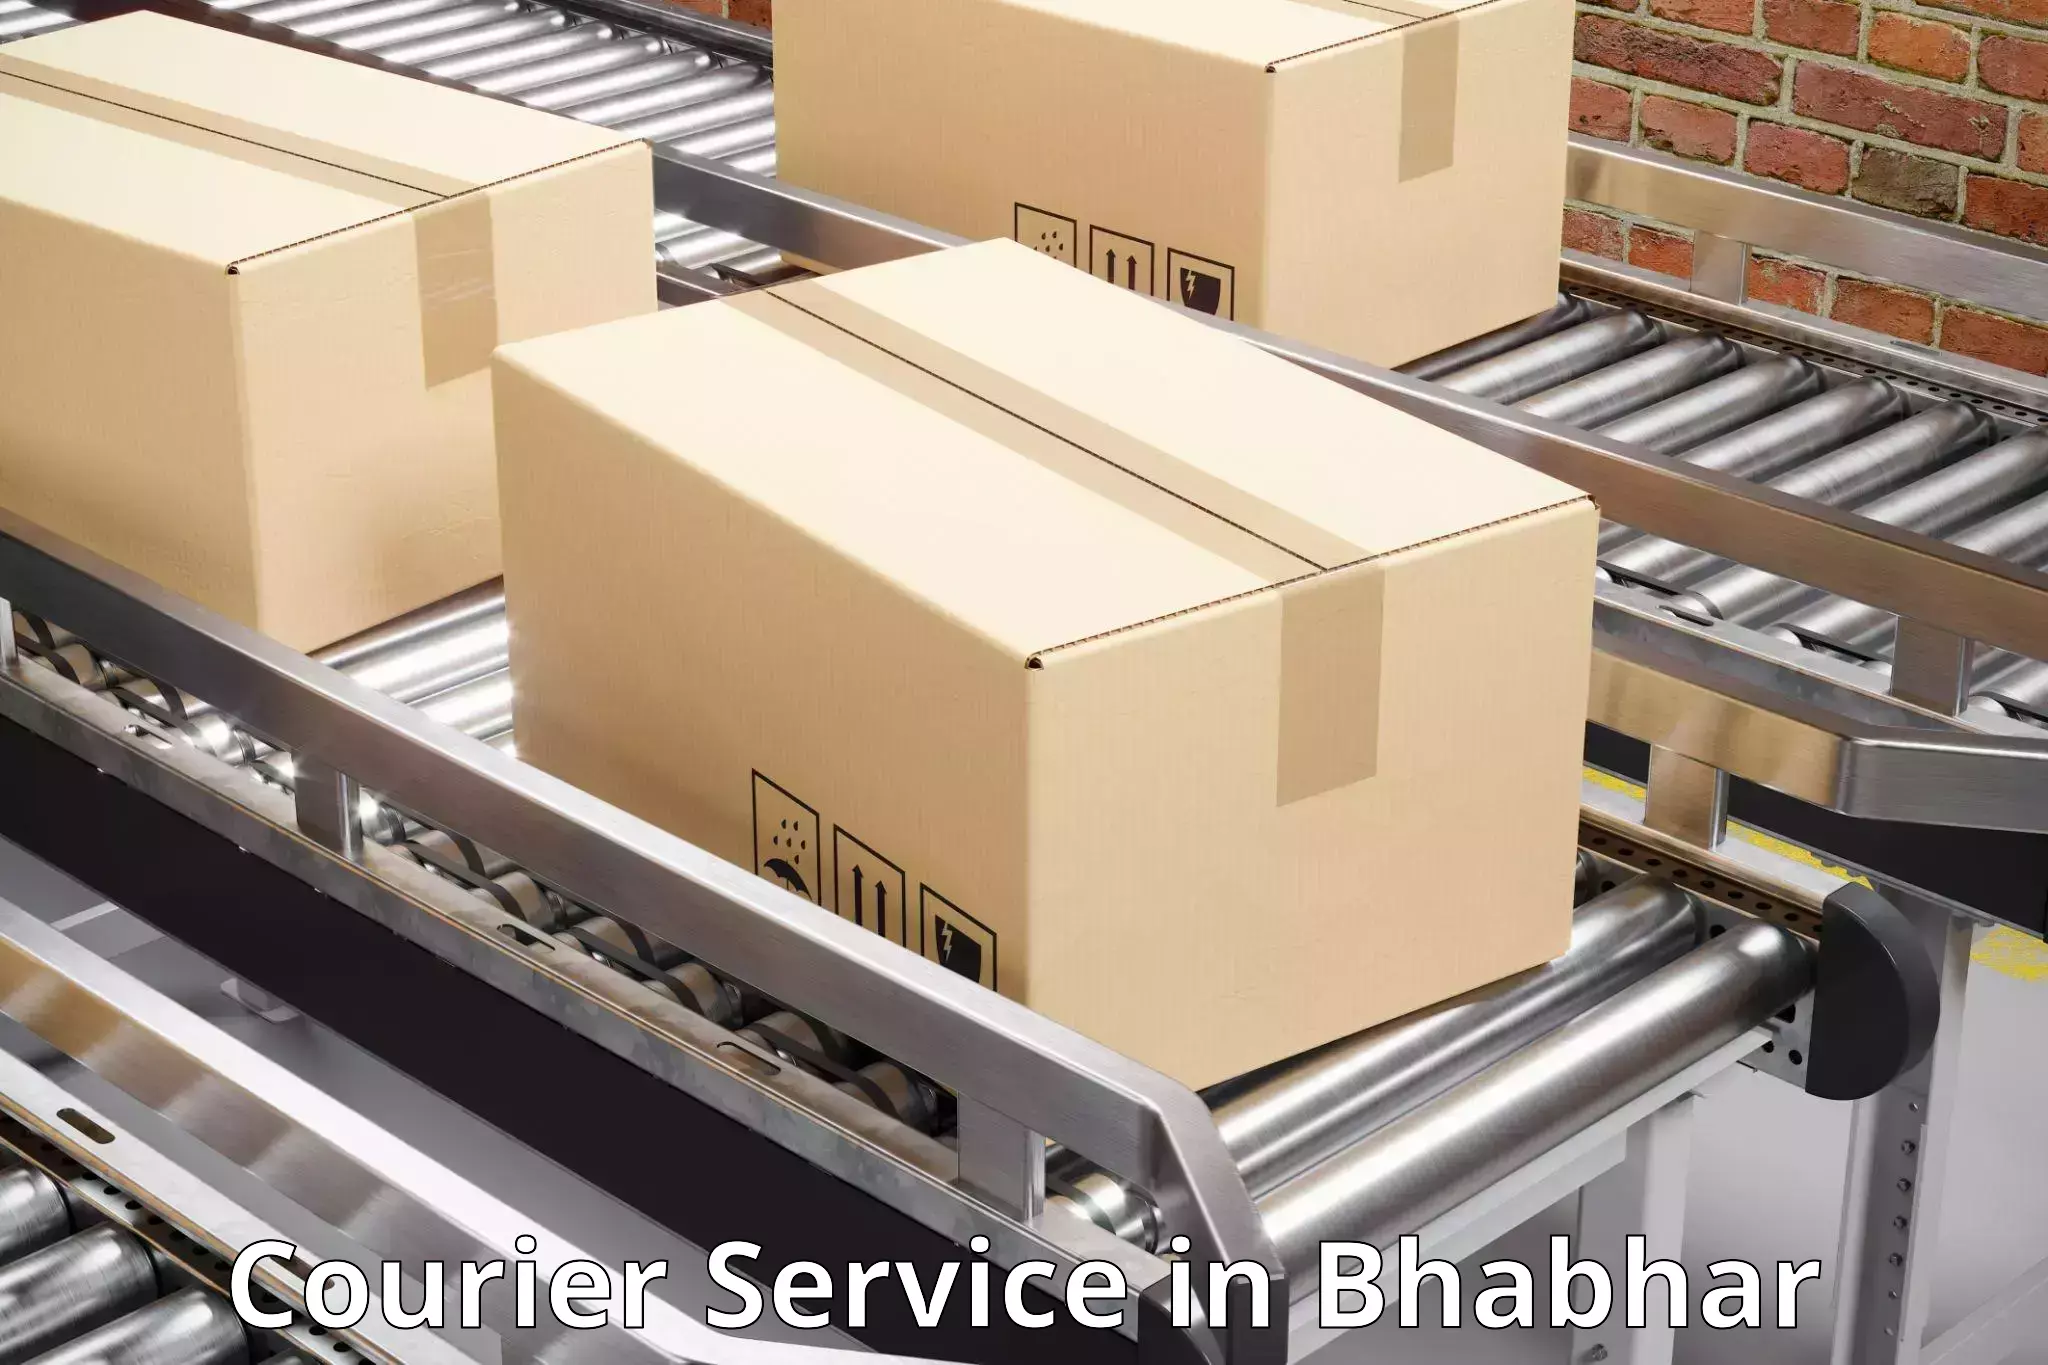 Courier services in Bhabhar